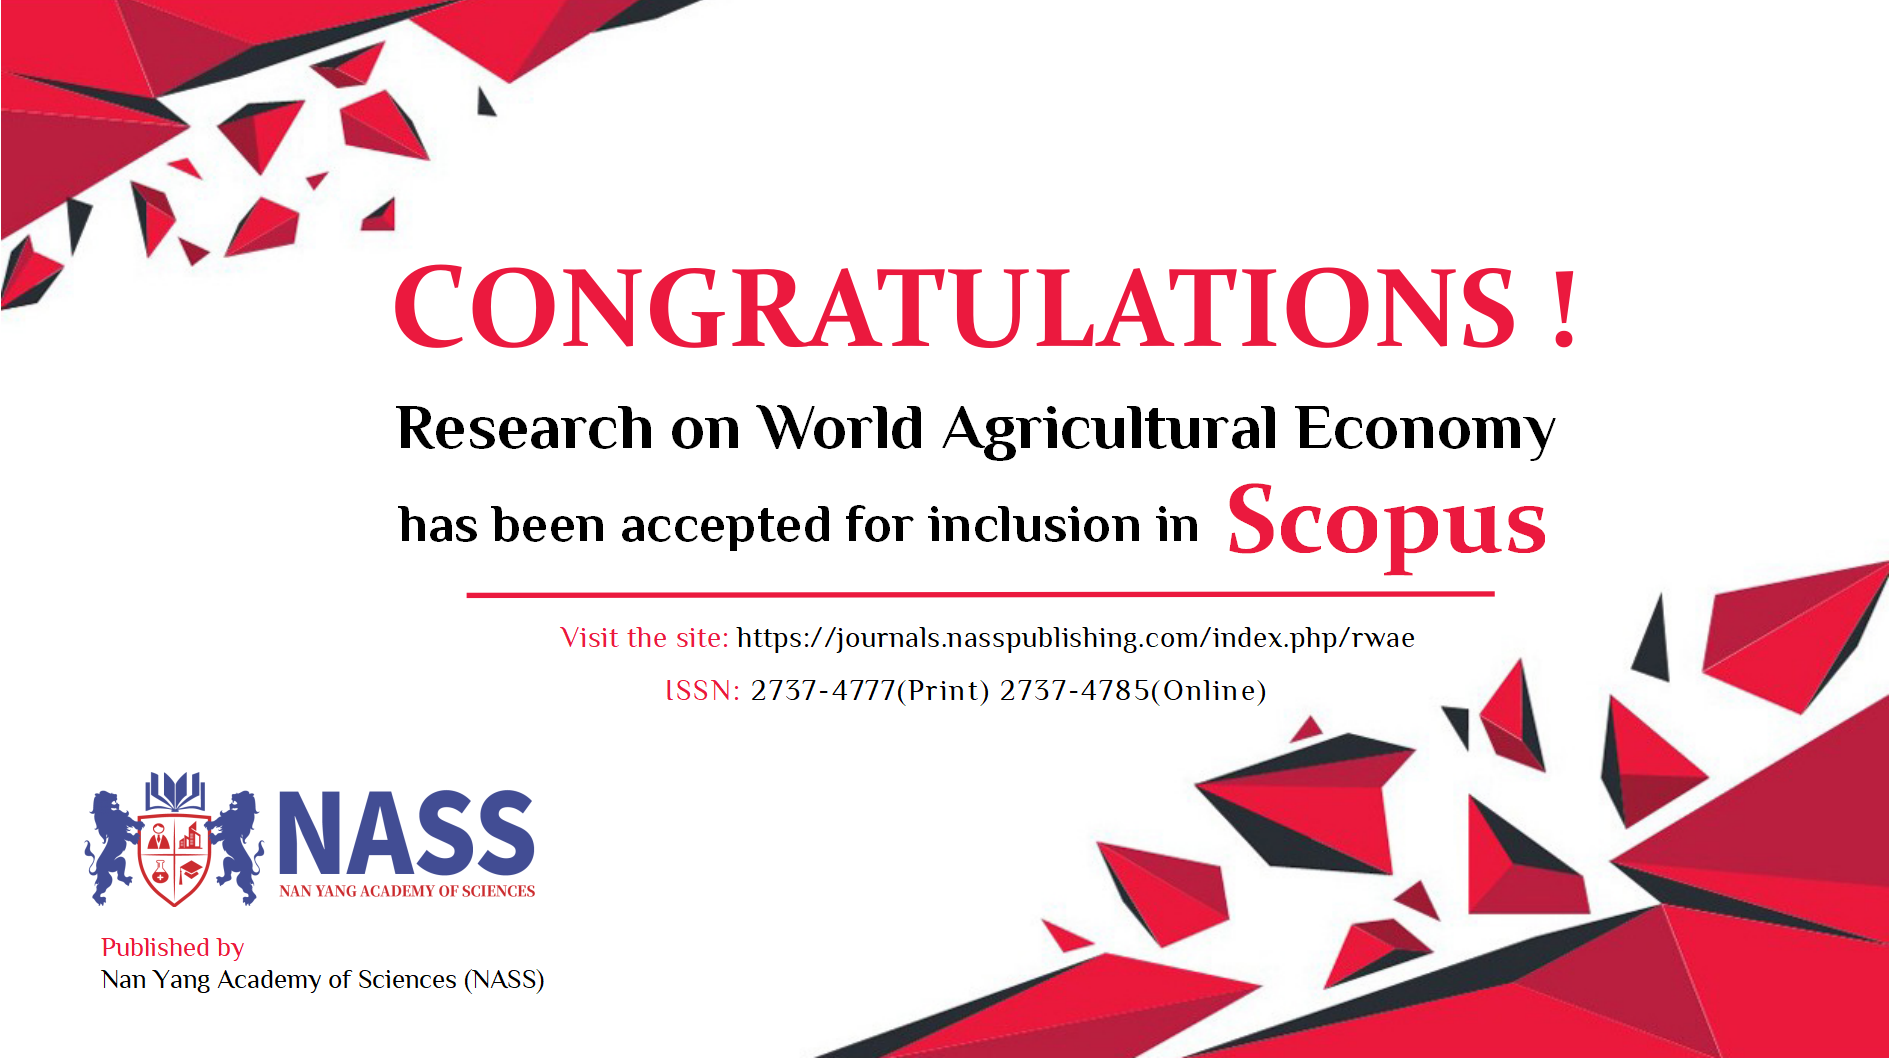 ＂Research on World Agricultural Economy＂ has been accepted by Scopus.